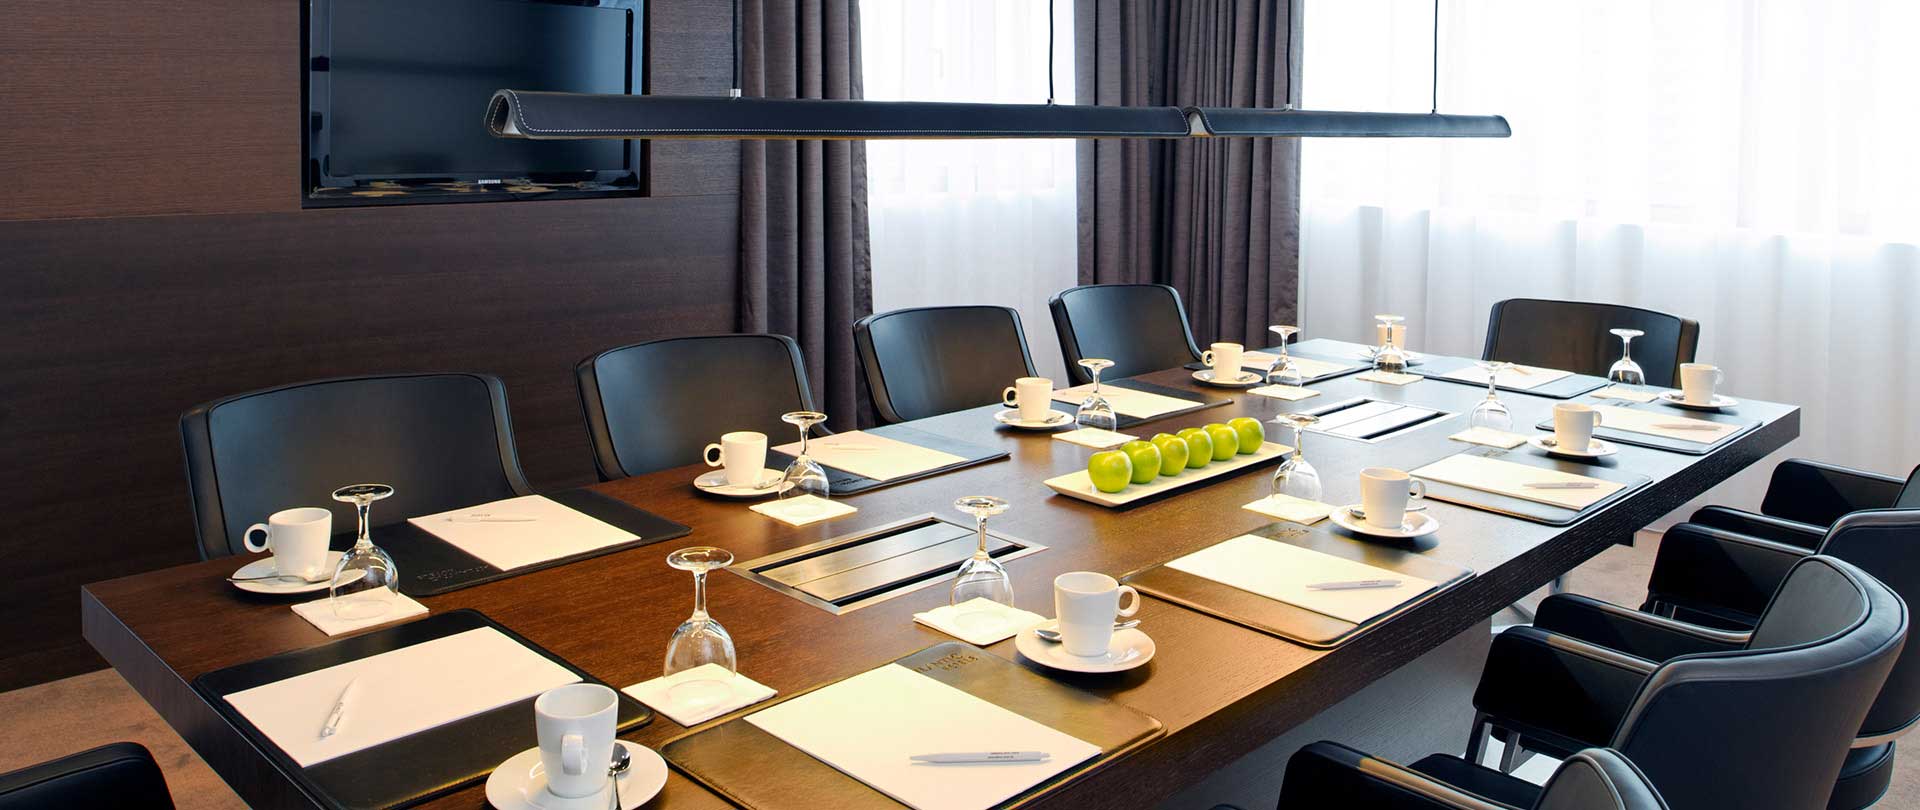 Meeting Rooms at WorldHotels in Europe